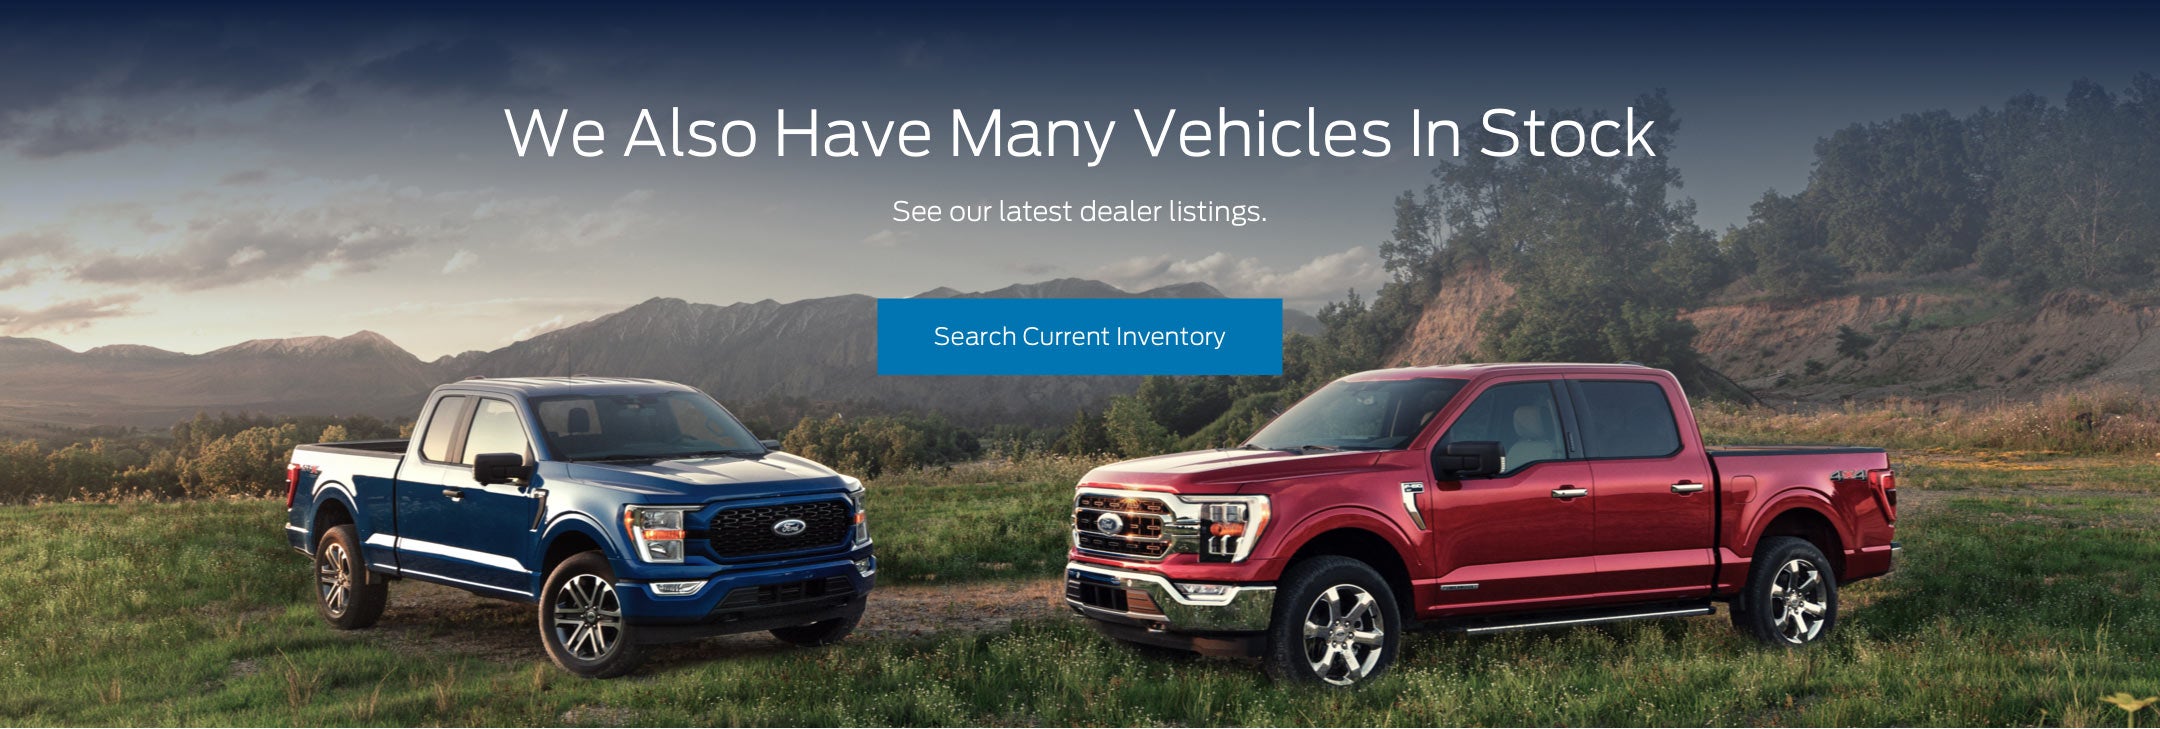 Ford vehicles in stock | Brinson Ford of Corsicana in Corsicana TX